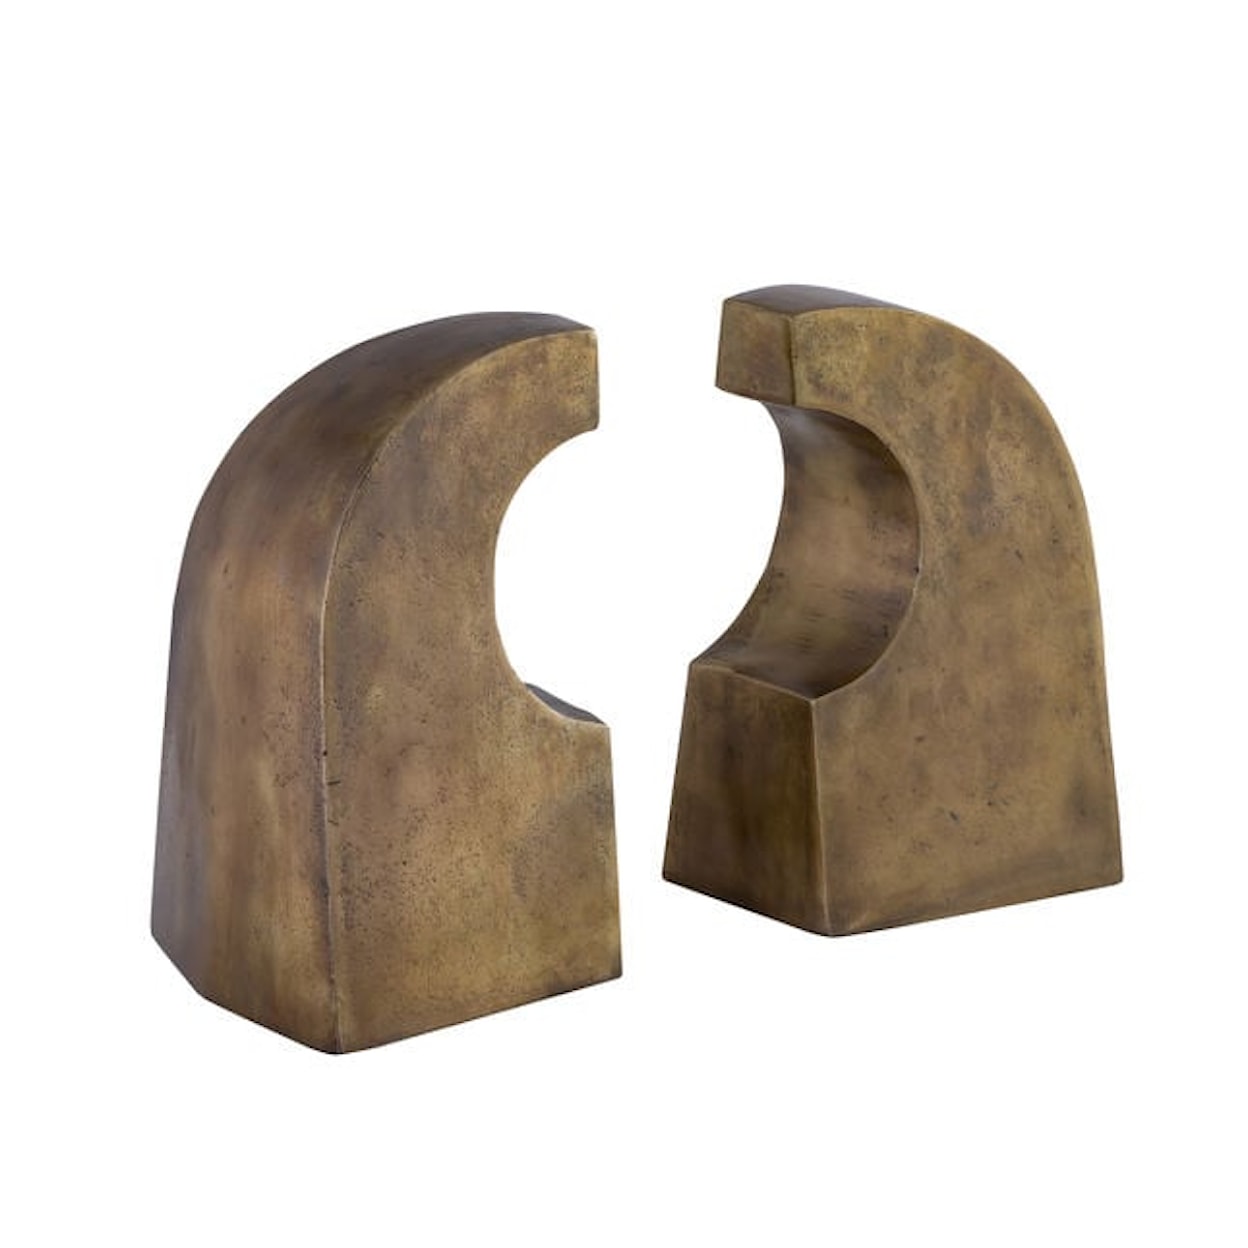 Dovetail Furniture Accessories NEEBING BOOKEND SET